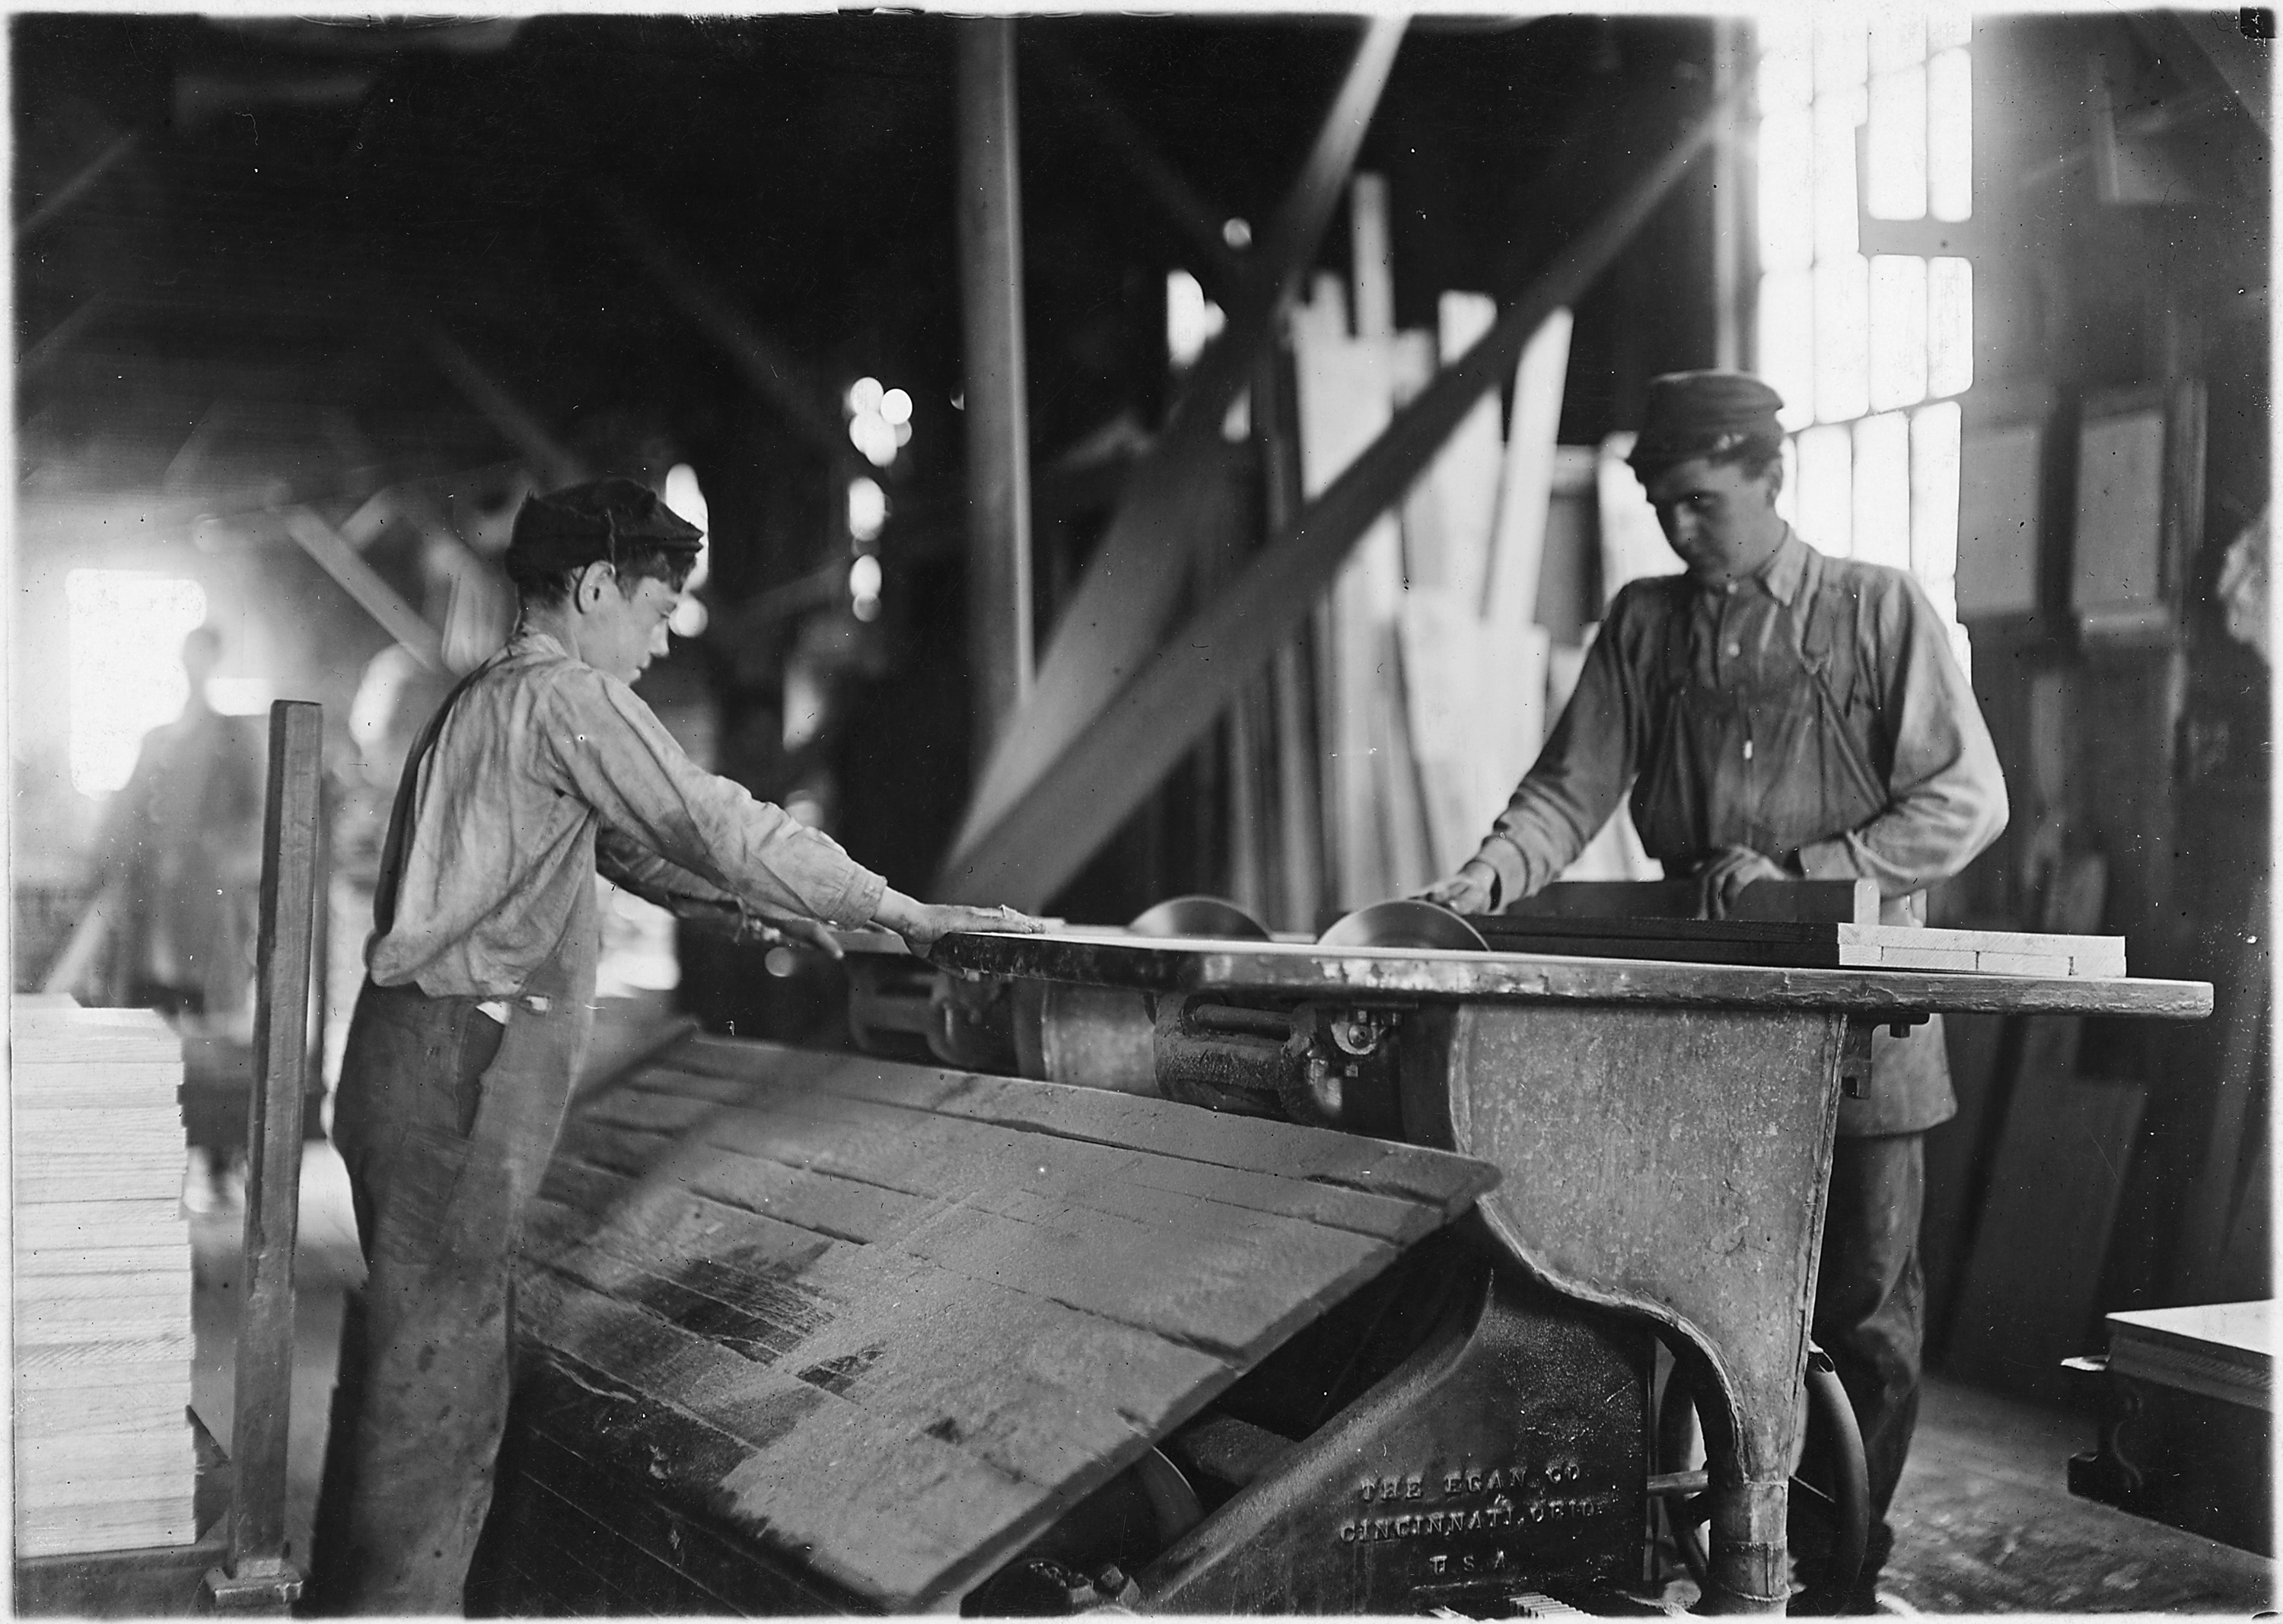 Boy working at double circular saws. N.Y. Dimension Supply Co. Evansville, Ind. - NARA - 523095